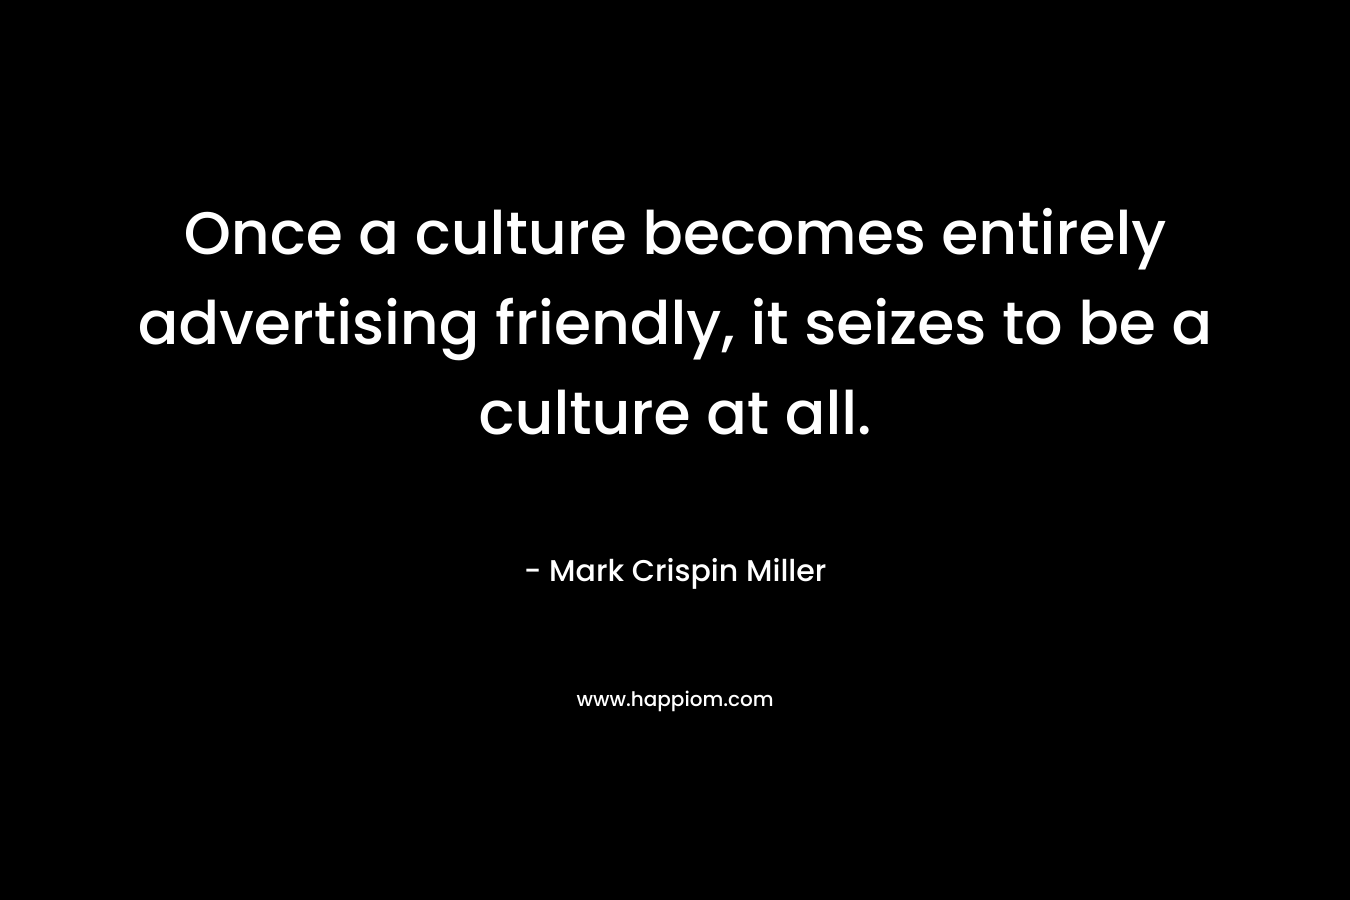 Once a culture becomes entirely advertising friendly, it seizes to be a culture at all. – Mark Crispin Miller